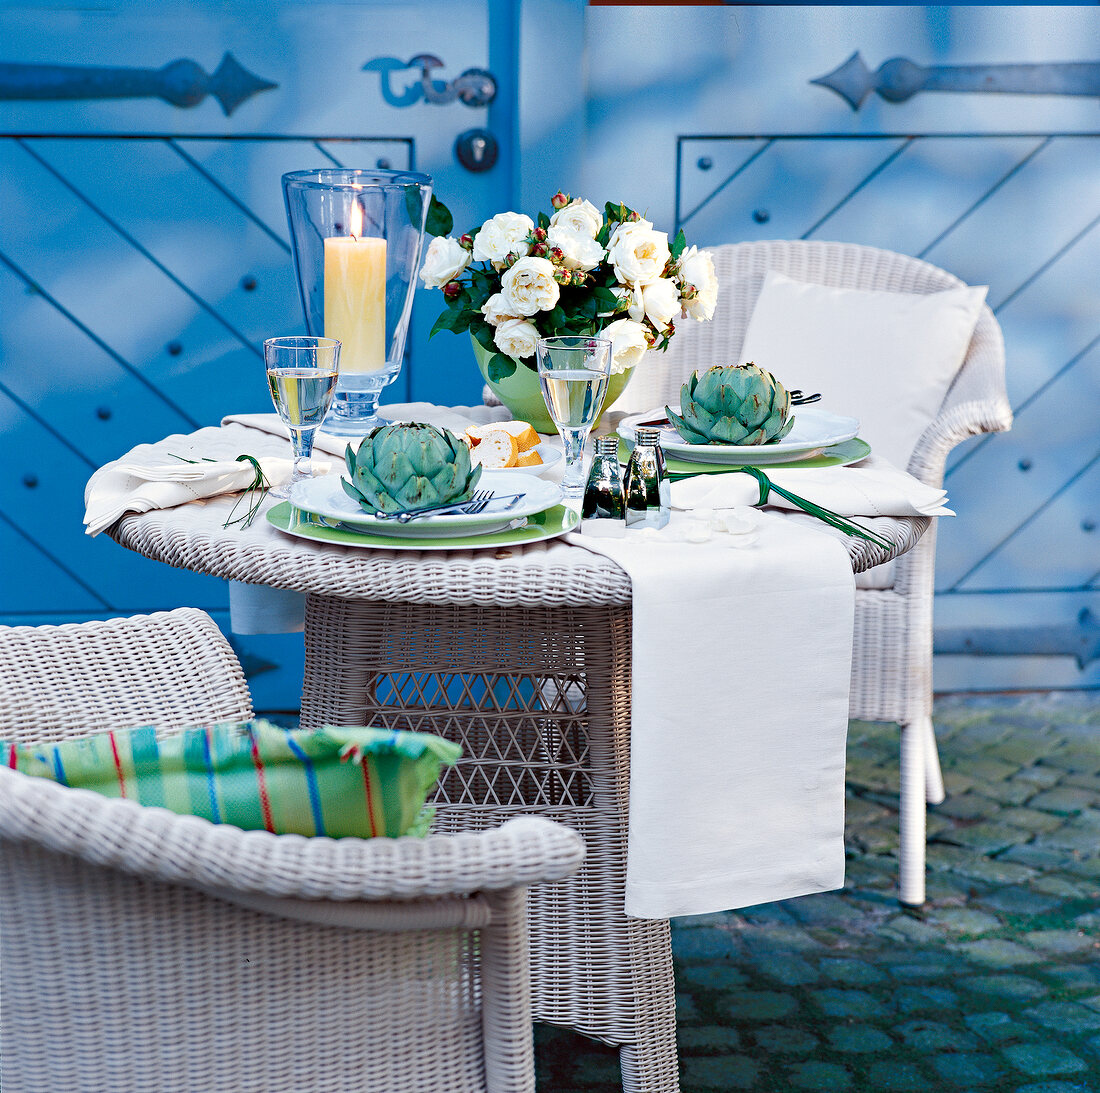 Wicker dining table with chair decorated with flowerpot, candles on garden terrace